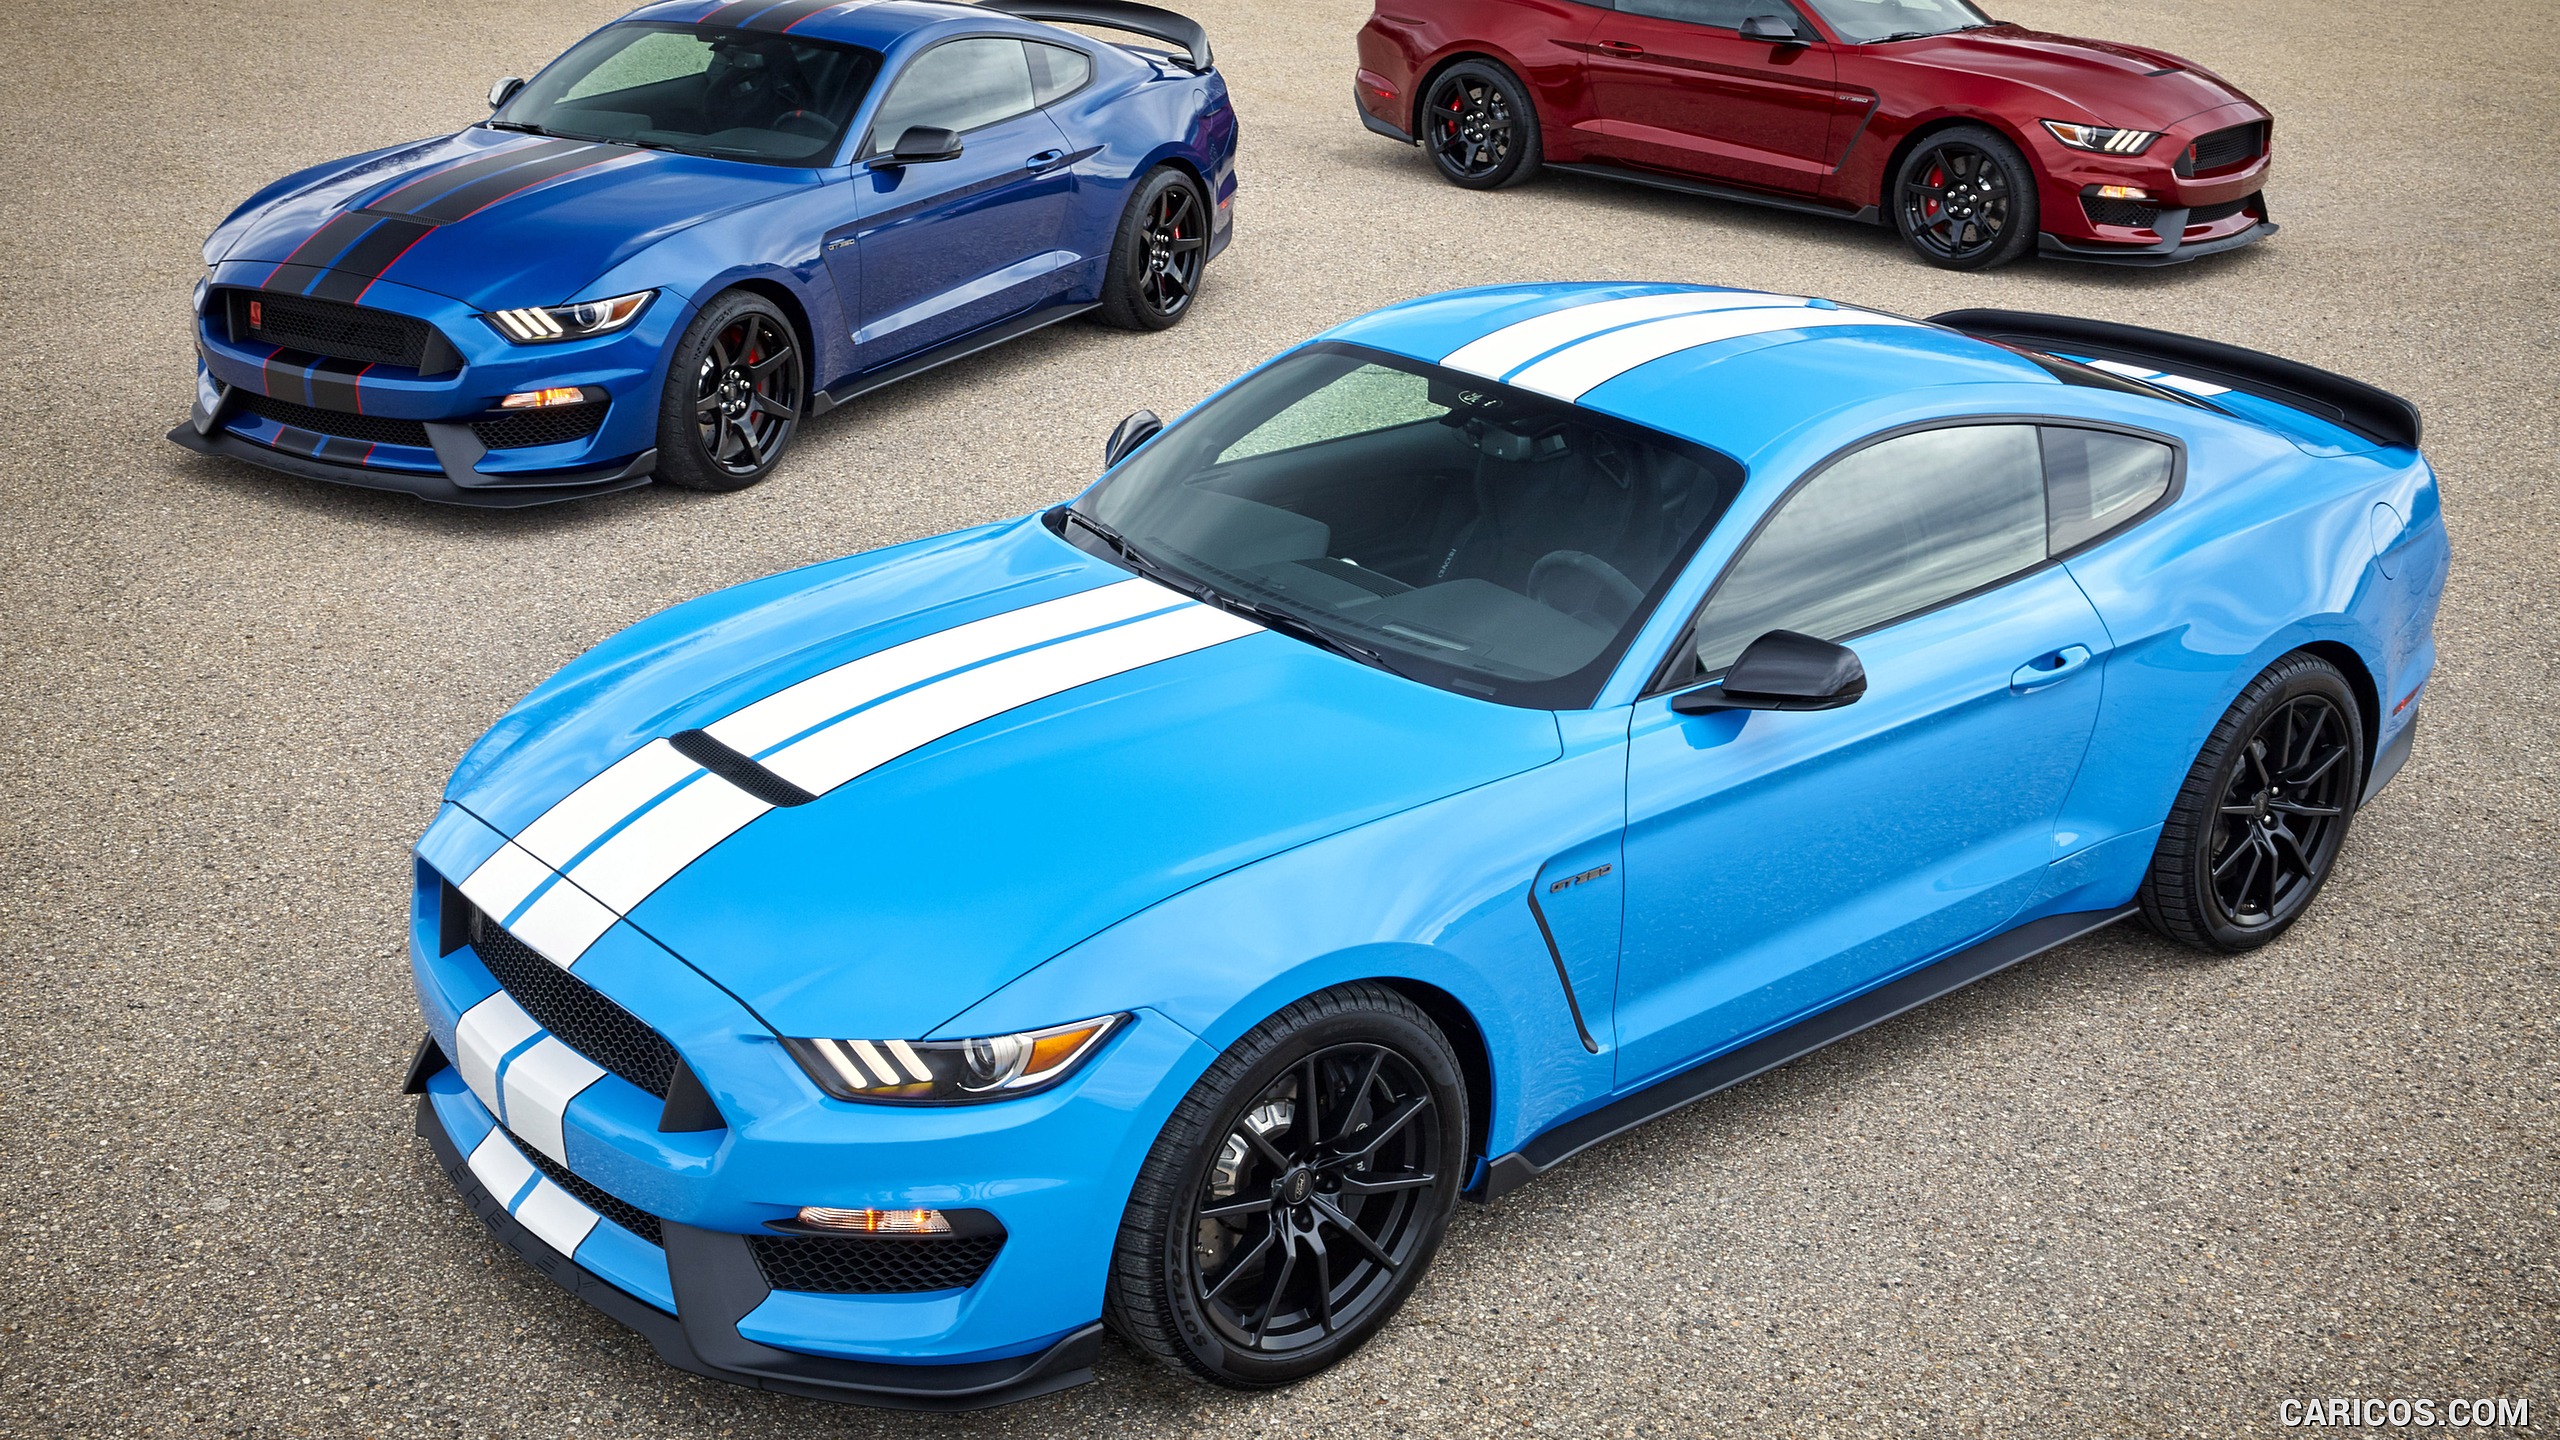 Ford Mustang Shelby Gt350 And Gt350r Top HD Wallpaper